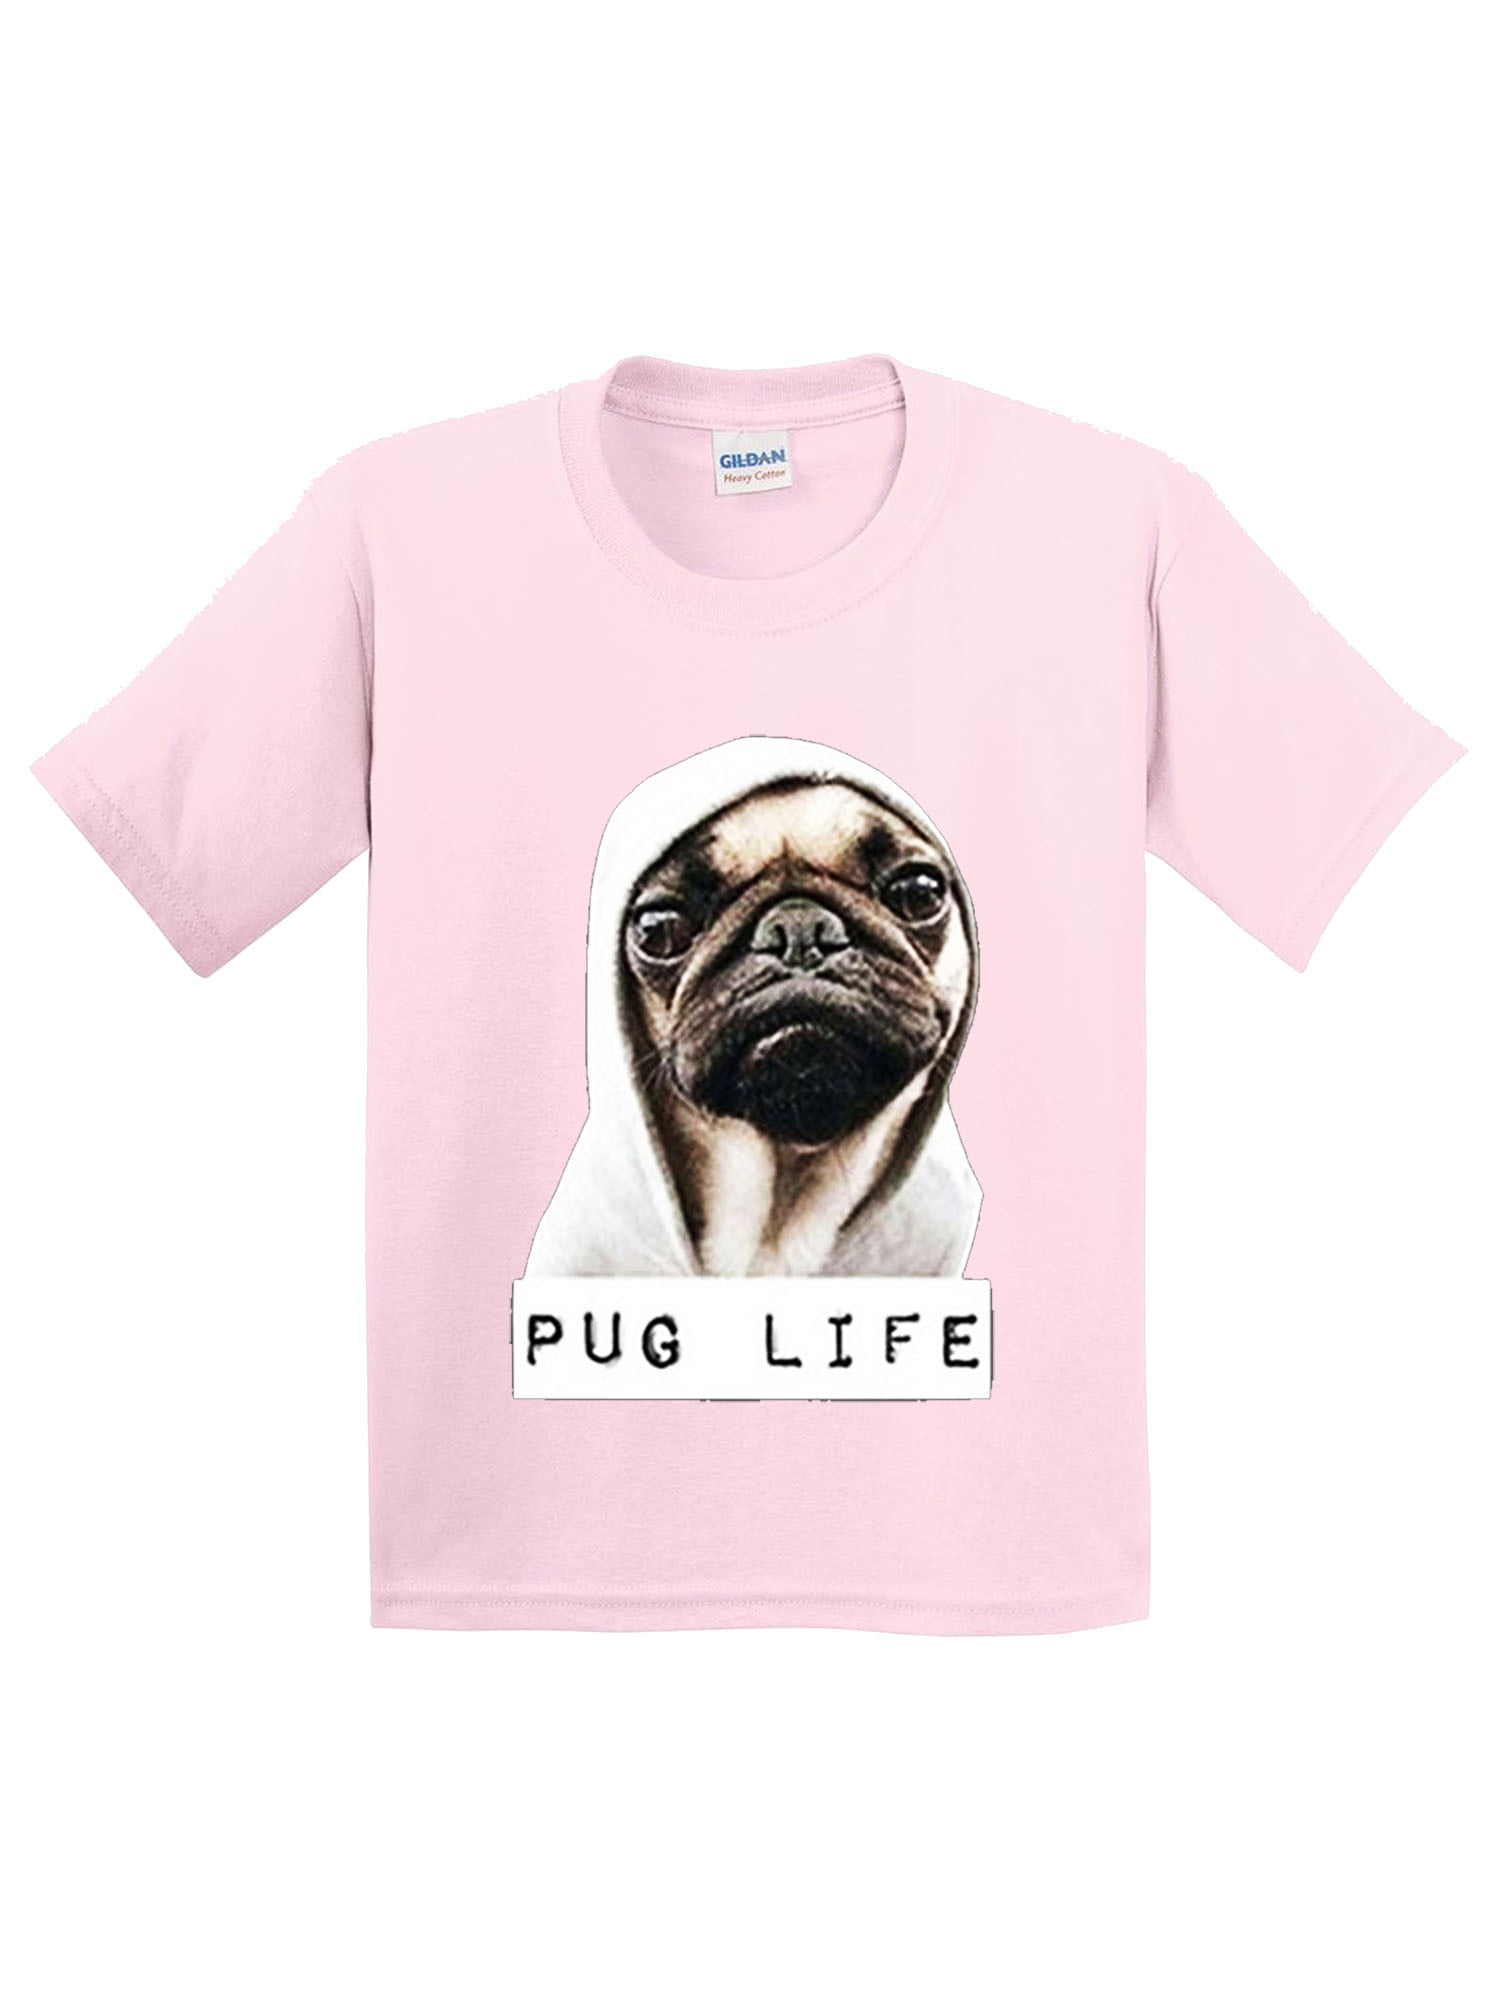 Details about   New Comic Pug Dog Design Mens Boys Cotton T-Shirts Graphic Tee Print Tops Shirts